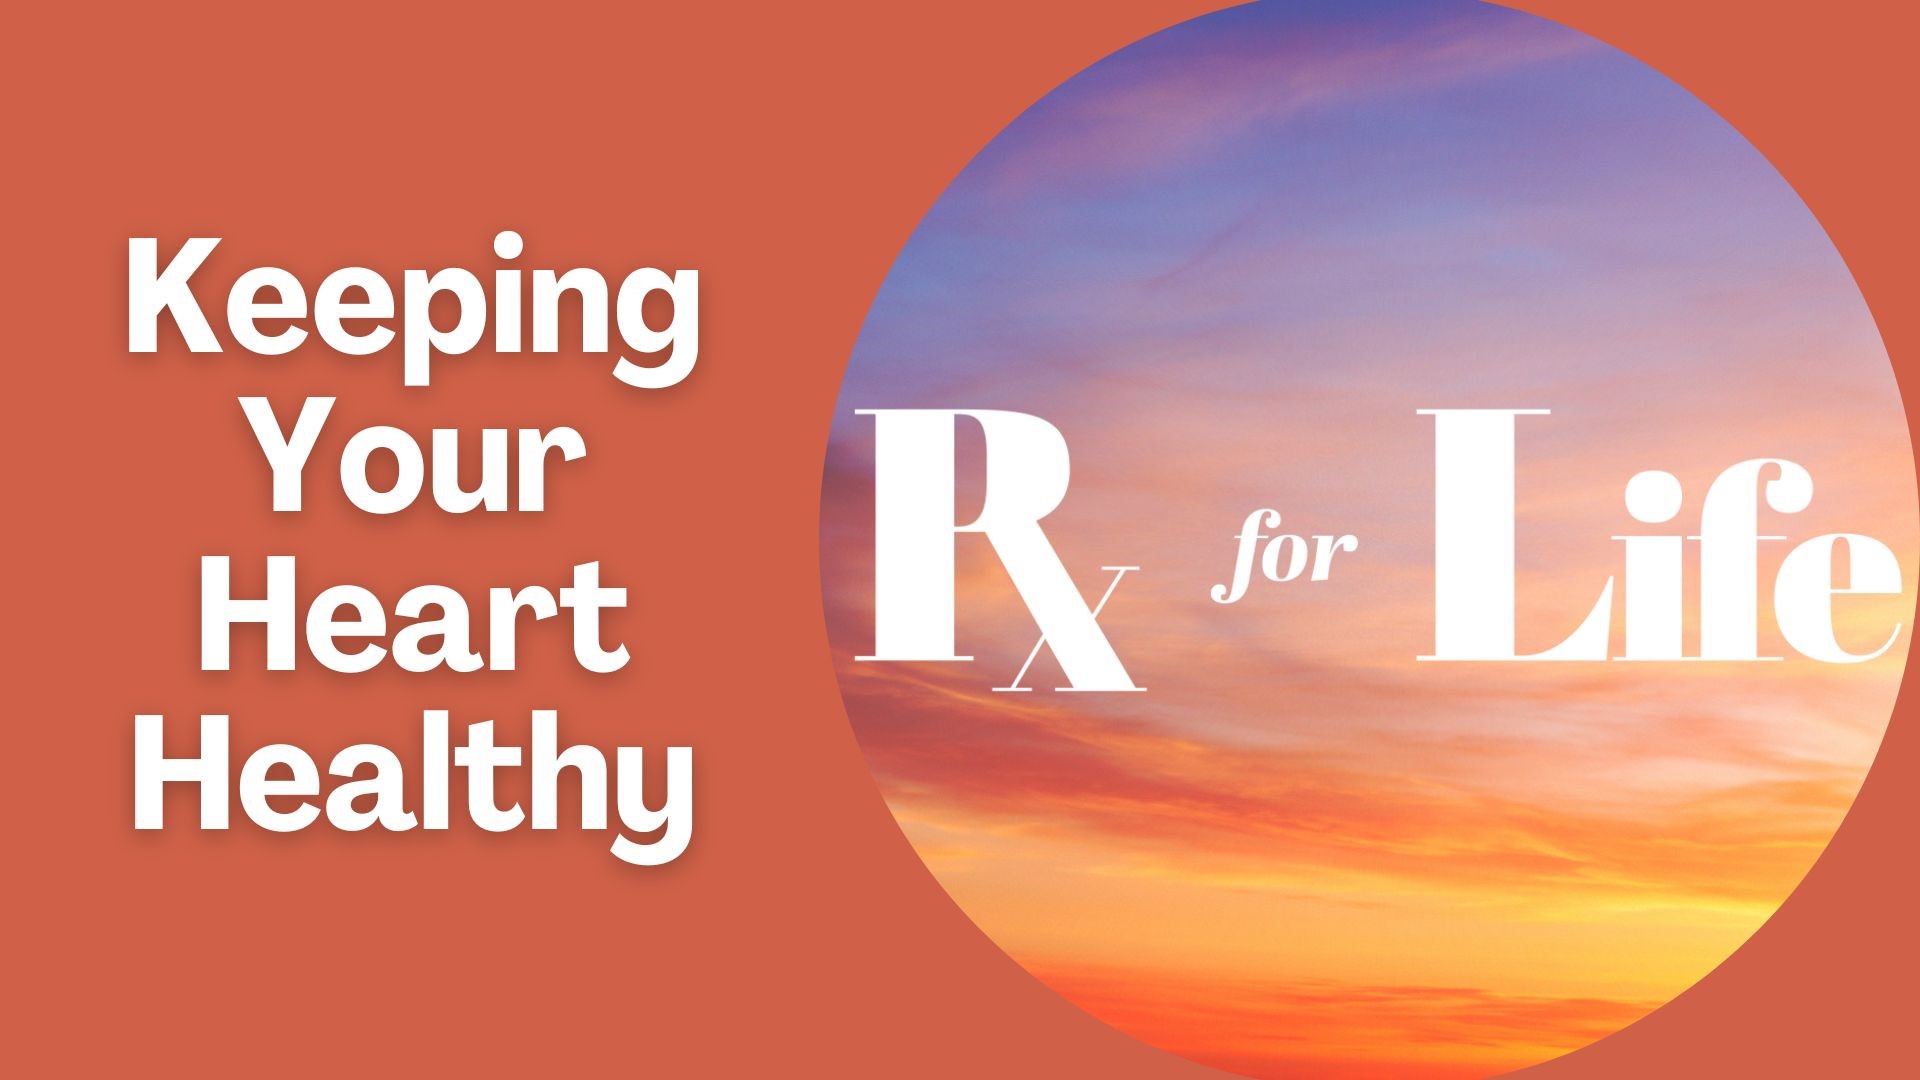 Monica Robins sits down with a doctor to discuss heart disease disparities, ways to prevent cardiovascular diseases and tips for heart-healthy living.